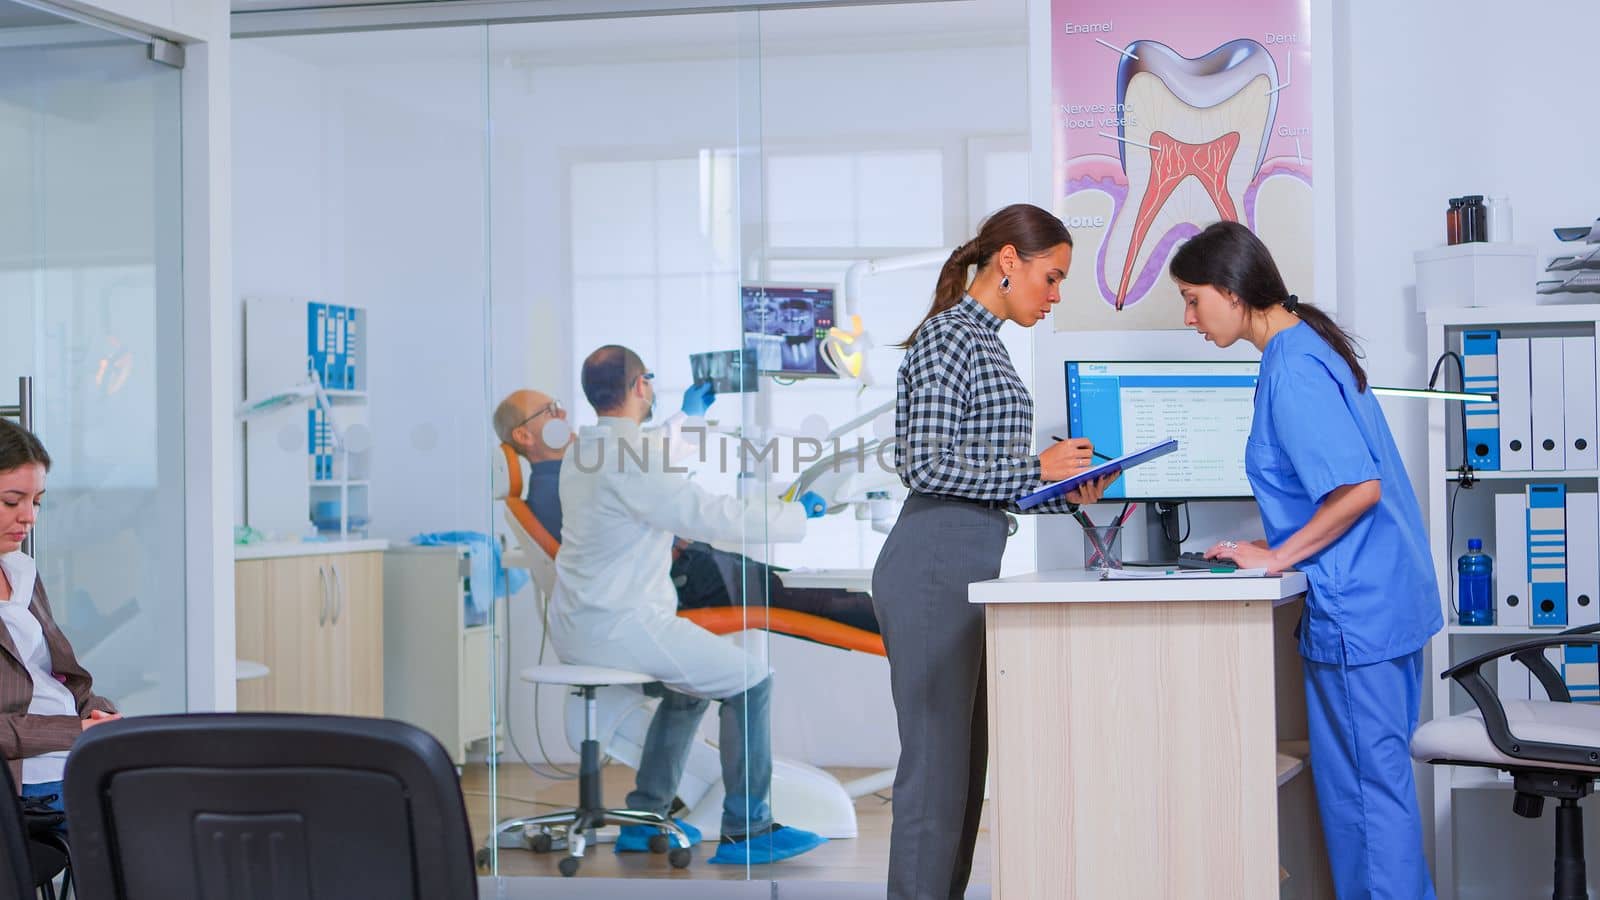 Professional dentist asking nurse for dental x-ray before examining patient while people waiting in reception area of modern stomatological clinic. Dental nurse typing on computer making appointments.